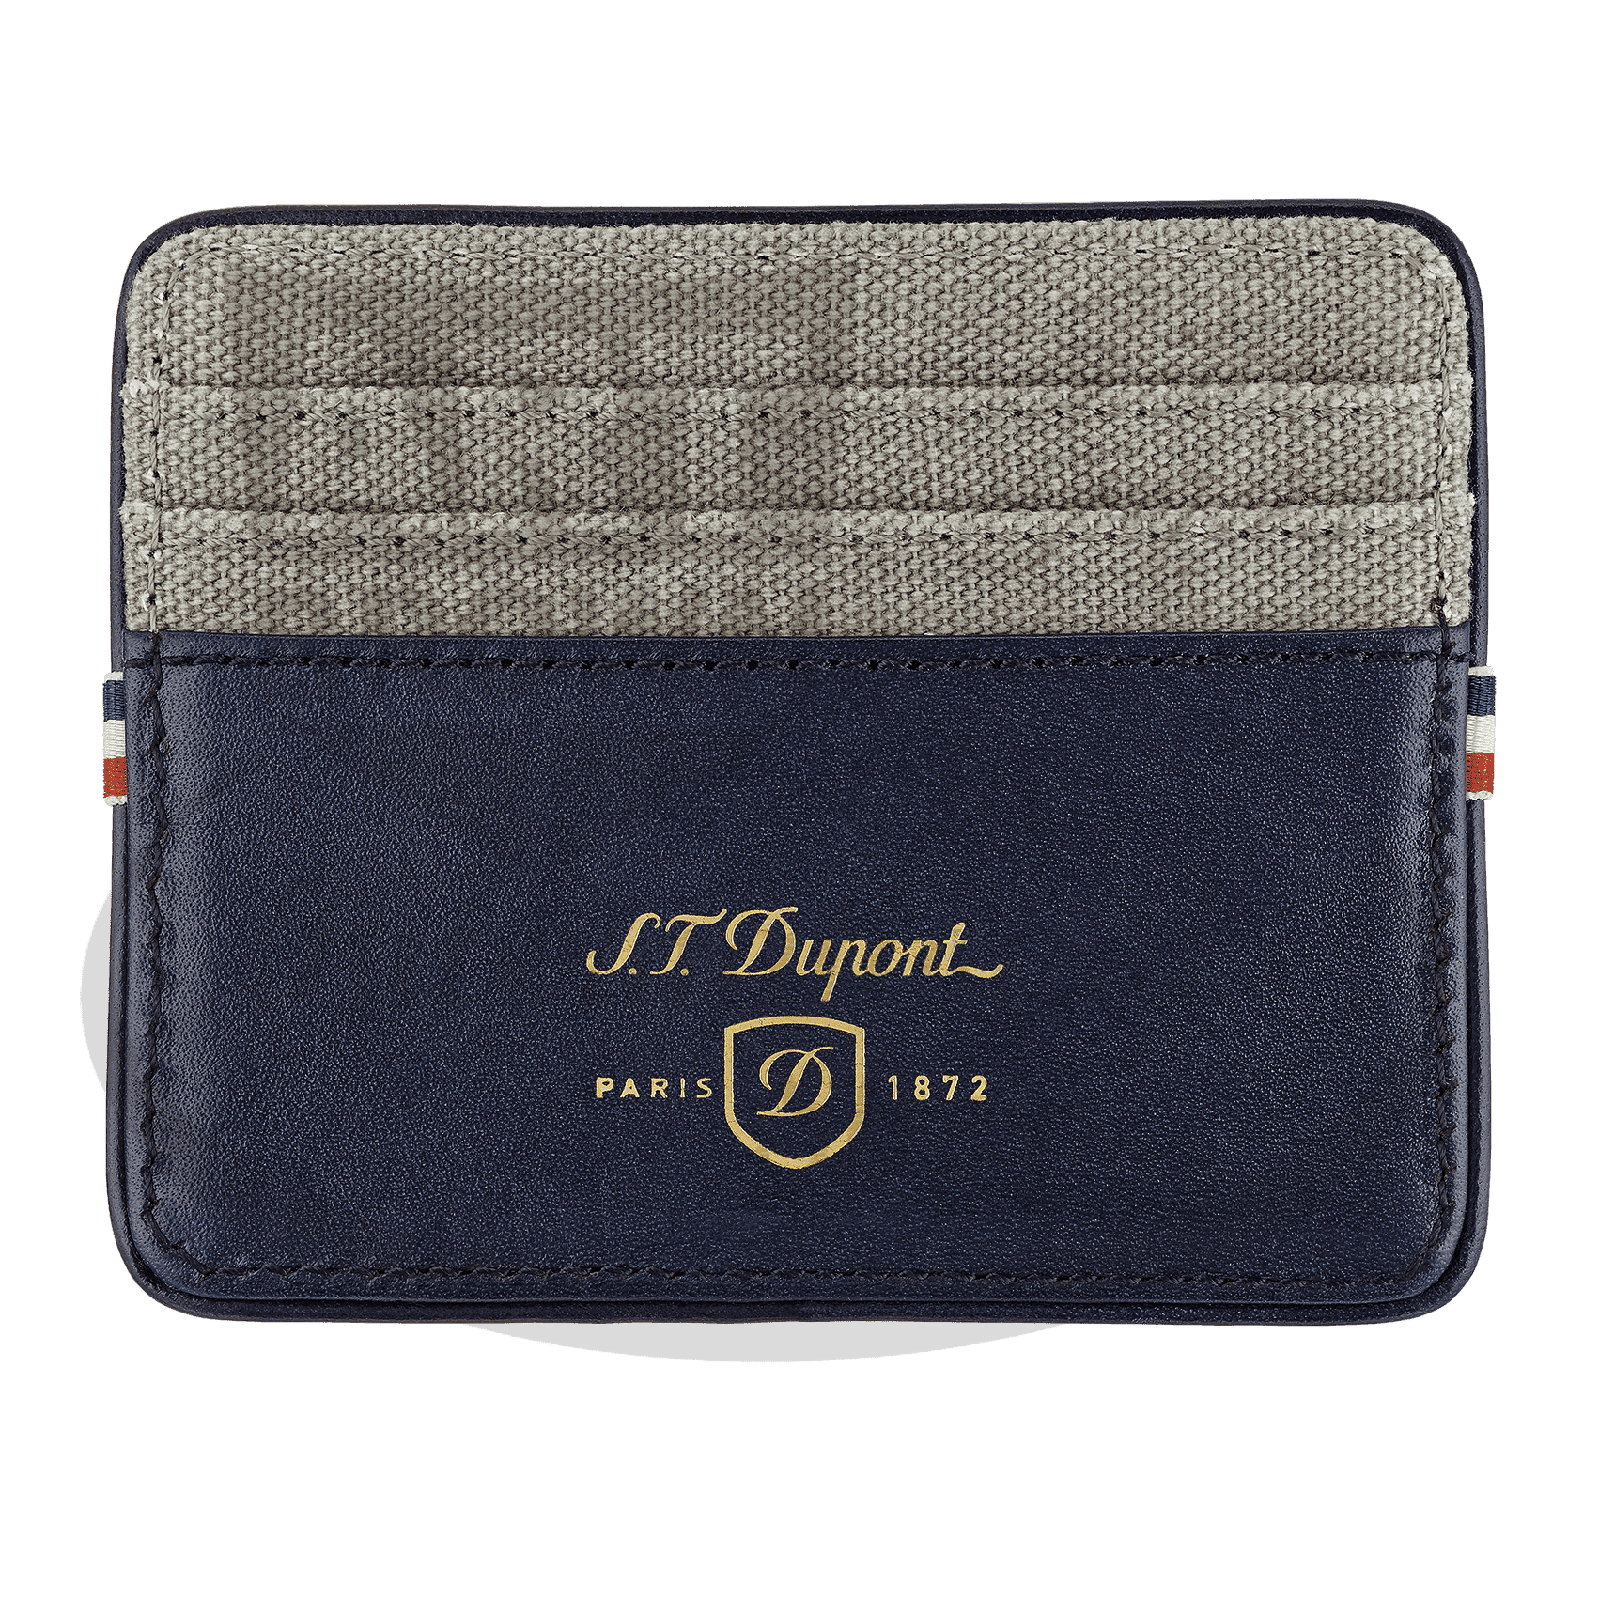 Verso ST Dupont Iconic Grey Credit Card Holder